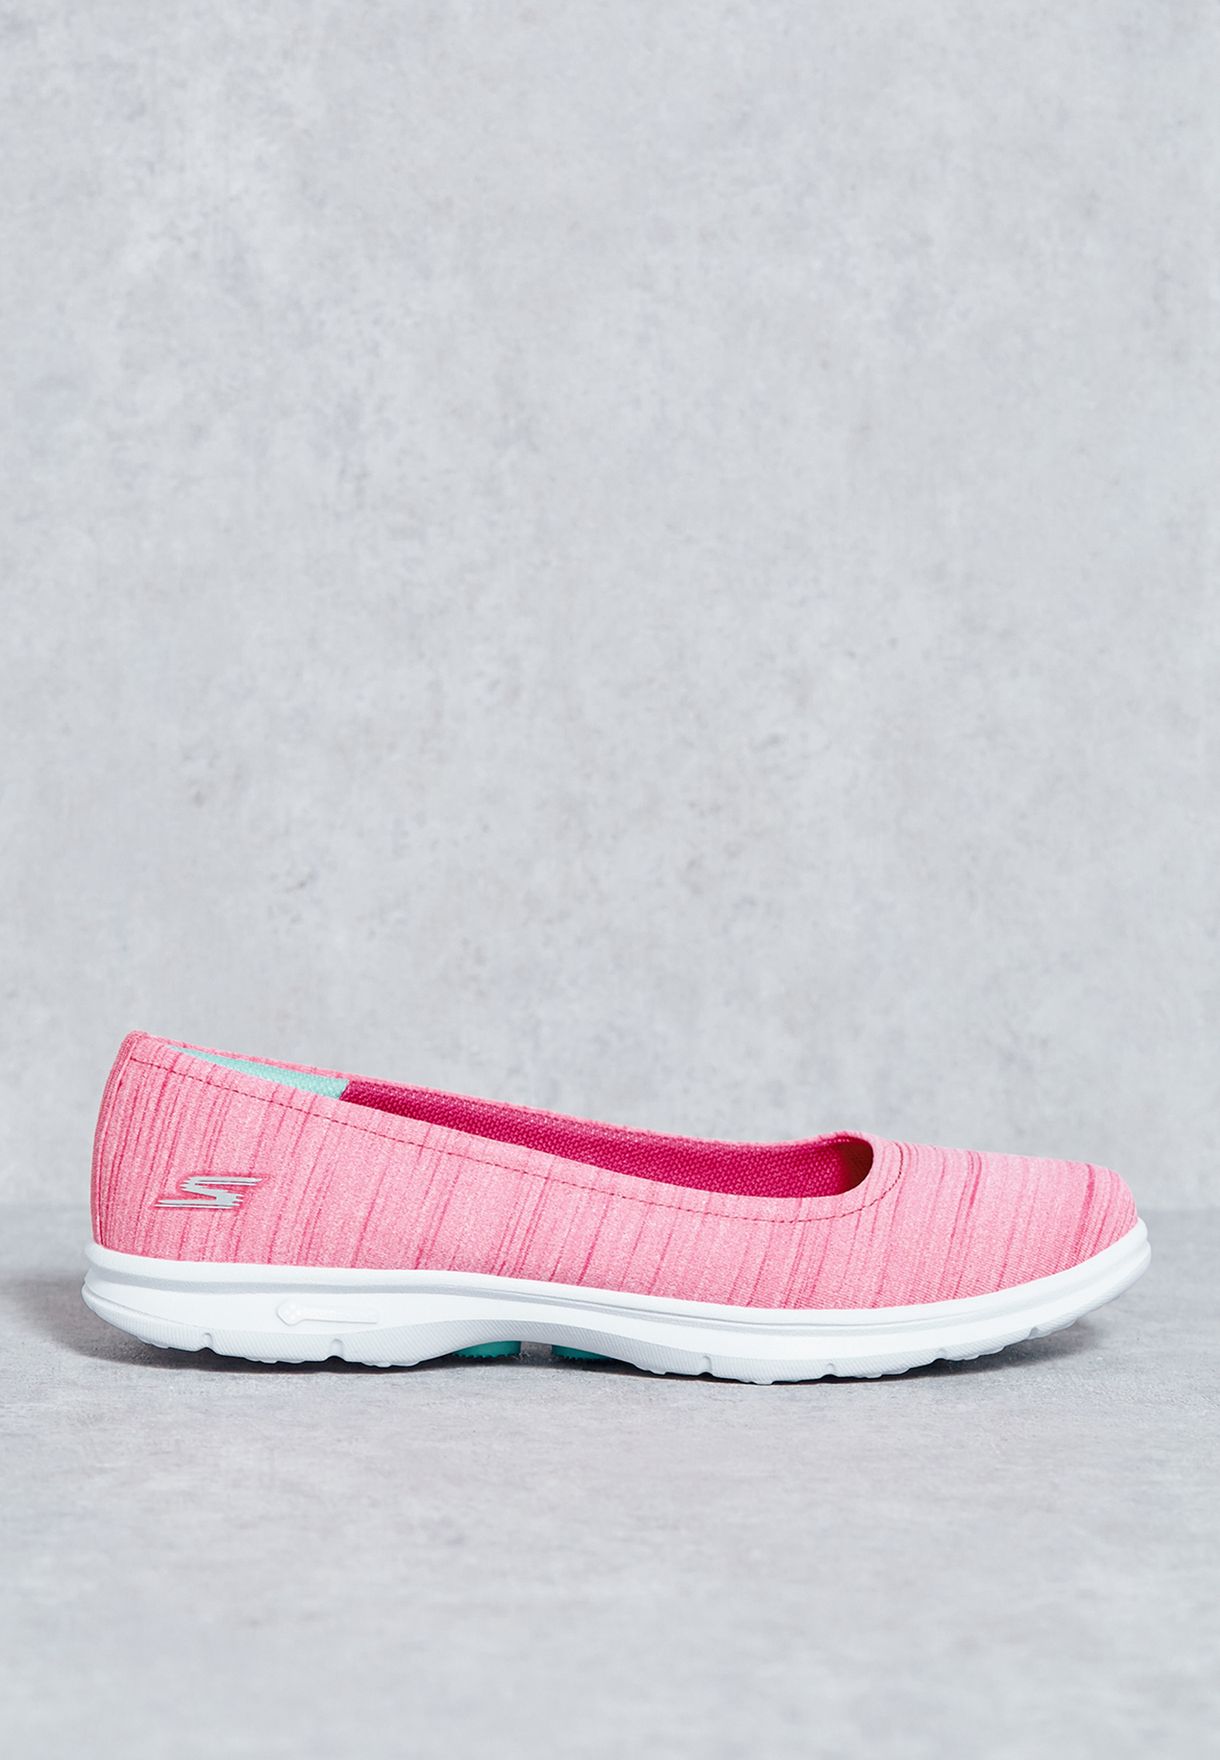 skechers go step trace